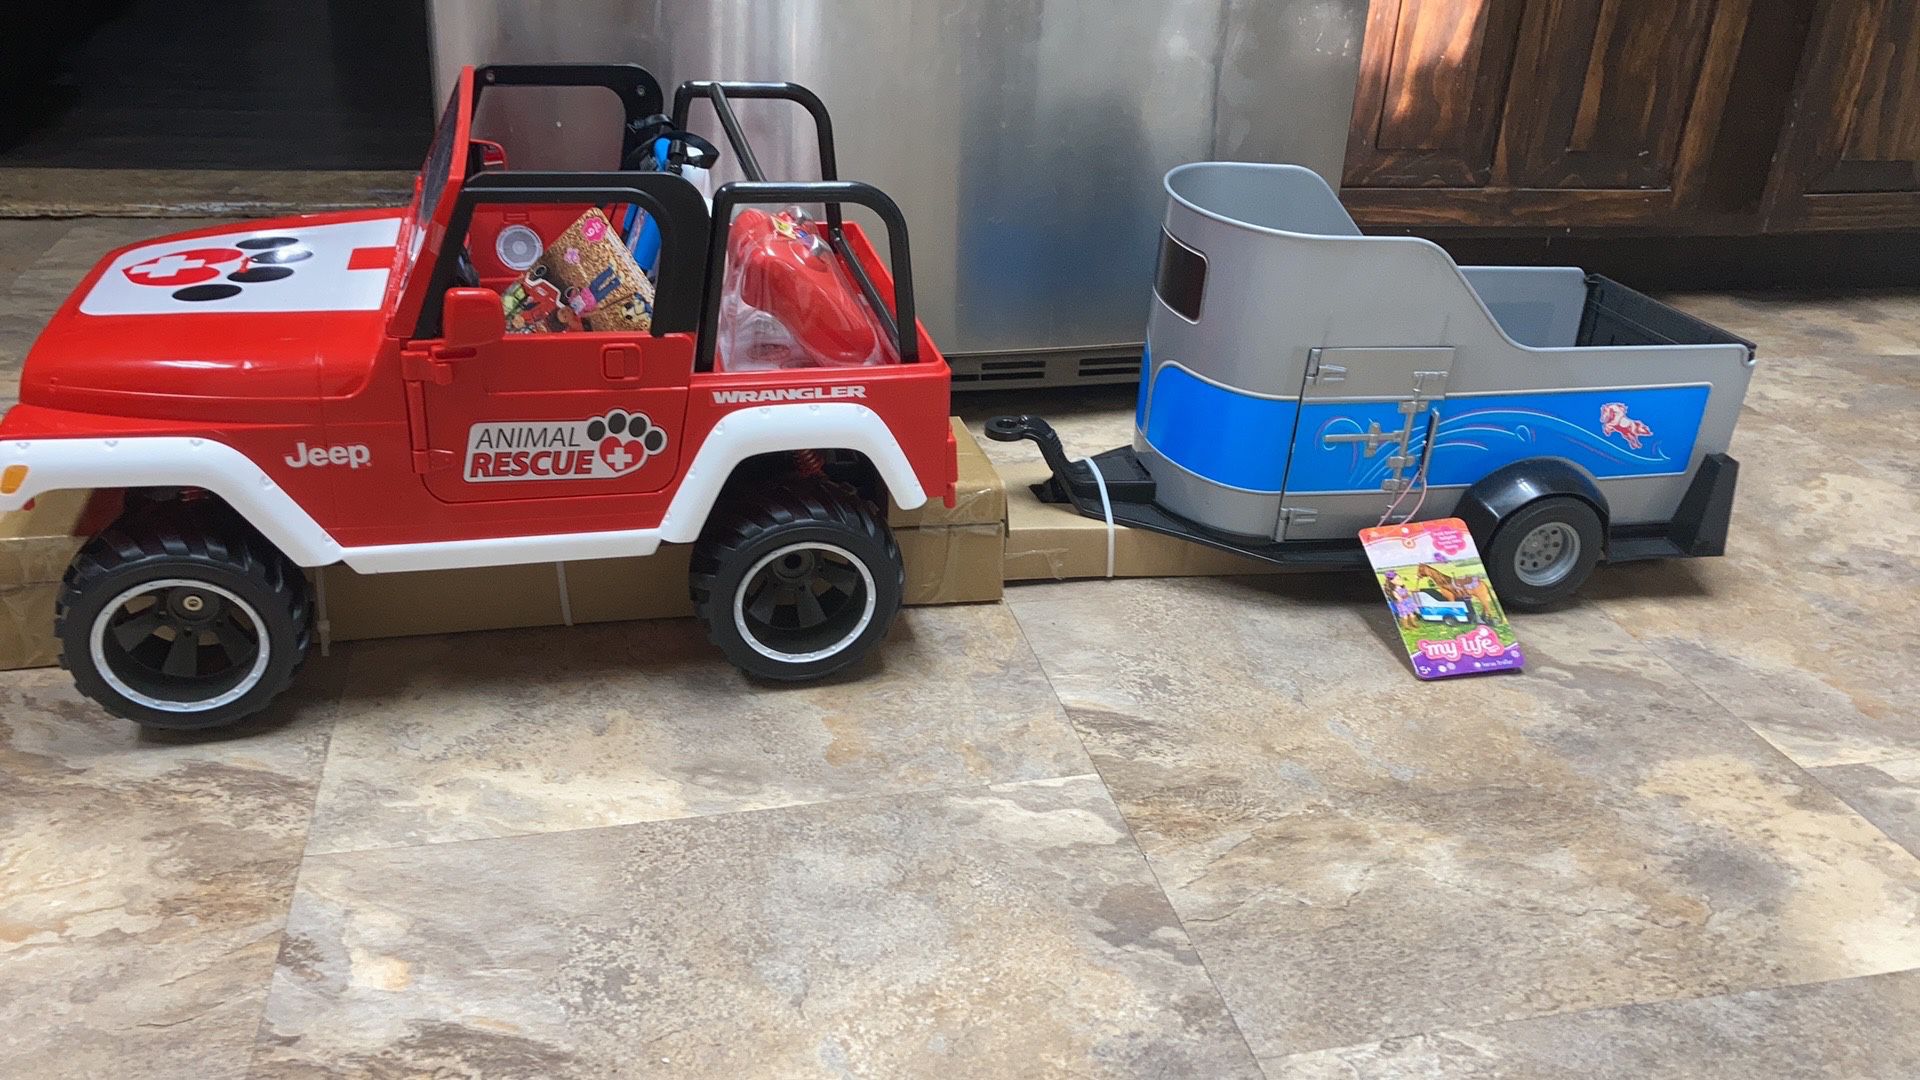 New my life remote control Jeep with trailer $50